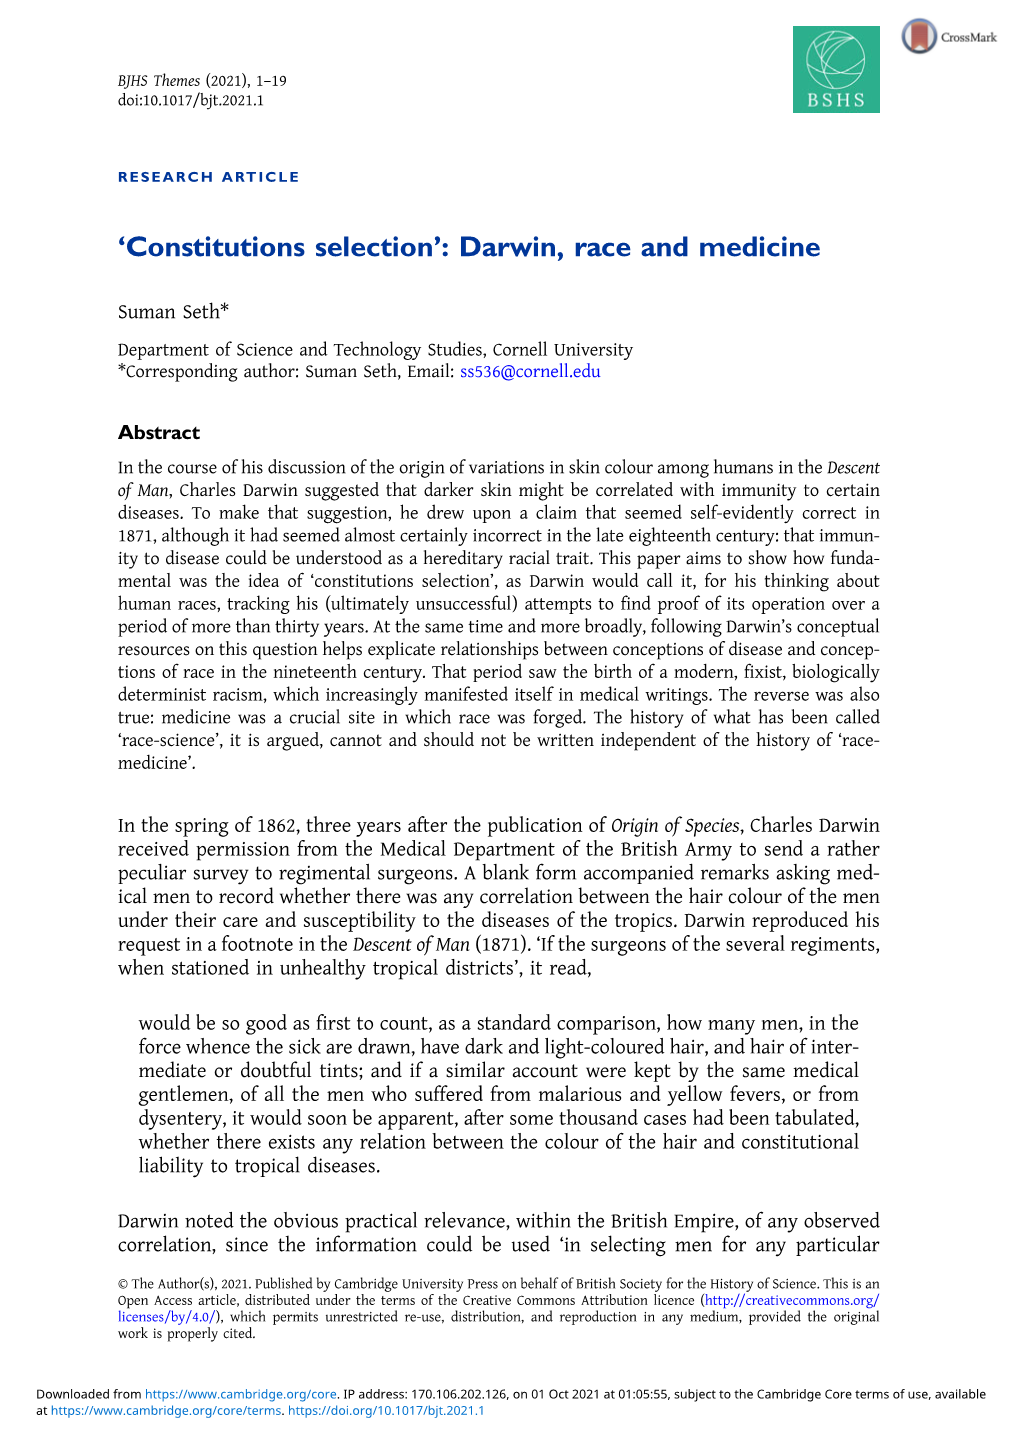 'Constitutions Selection': Darwin, Race and Medicine